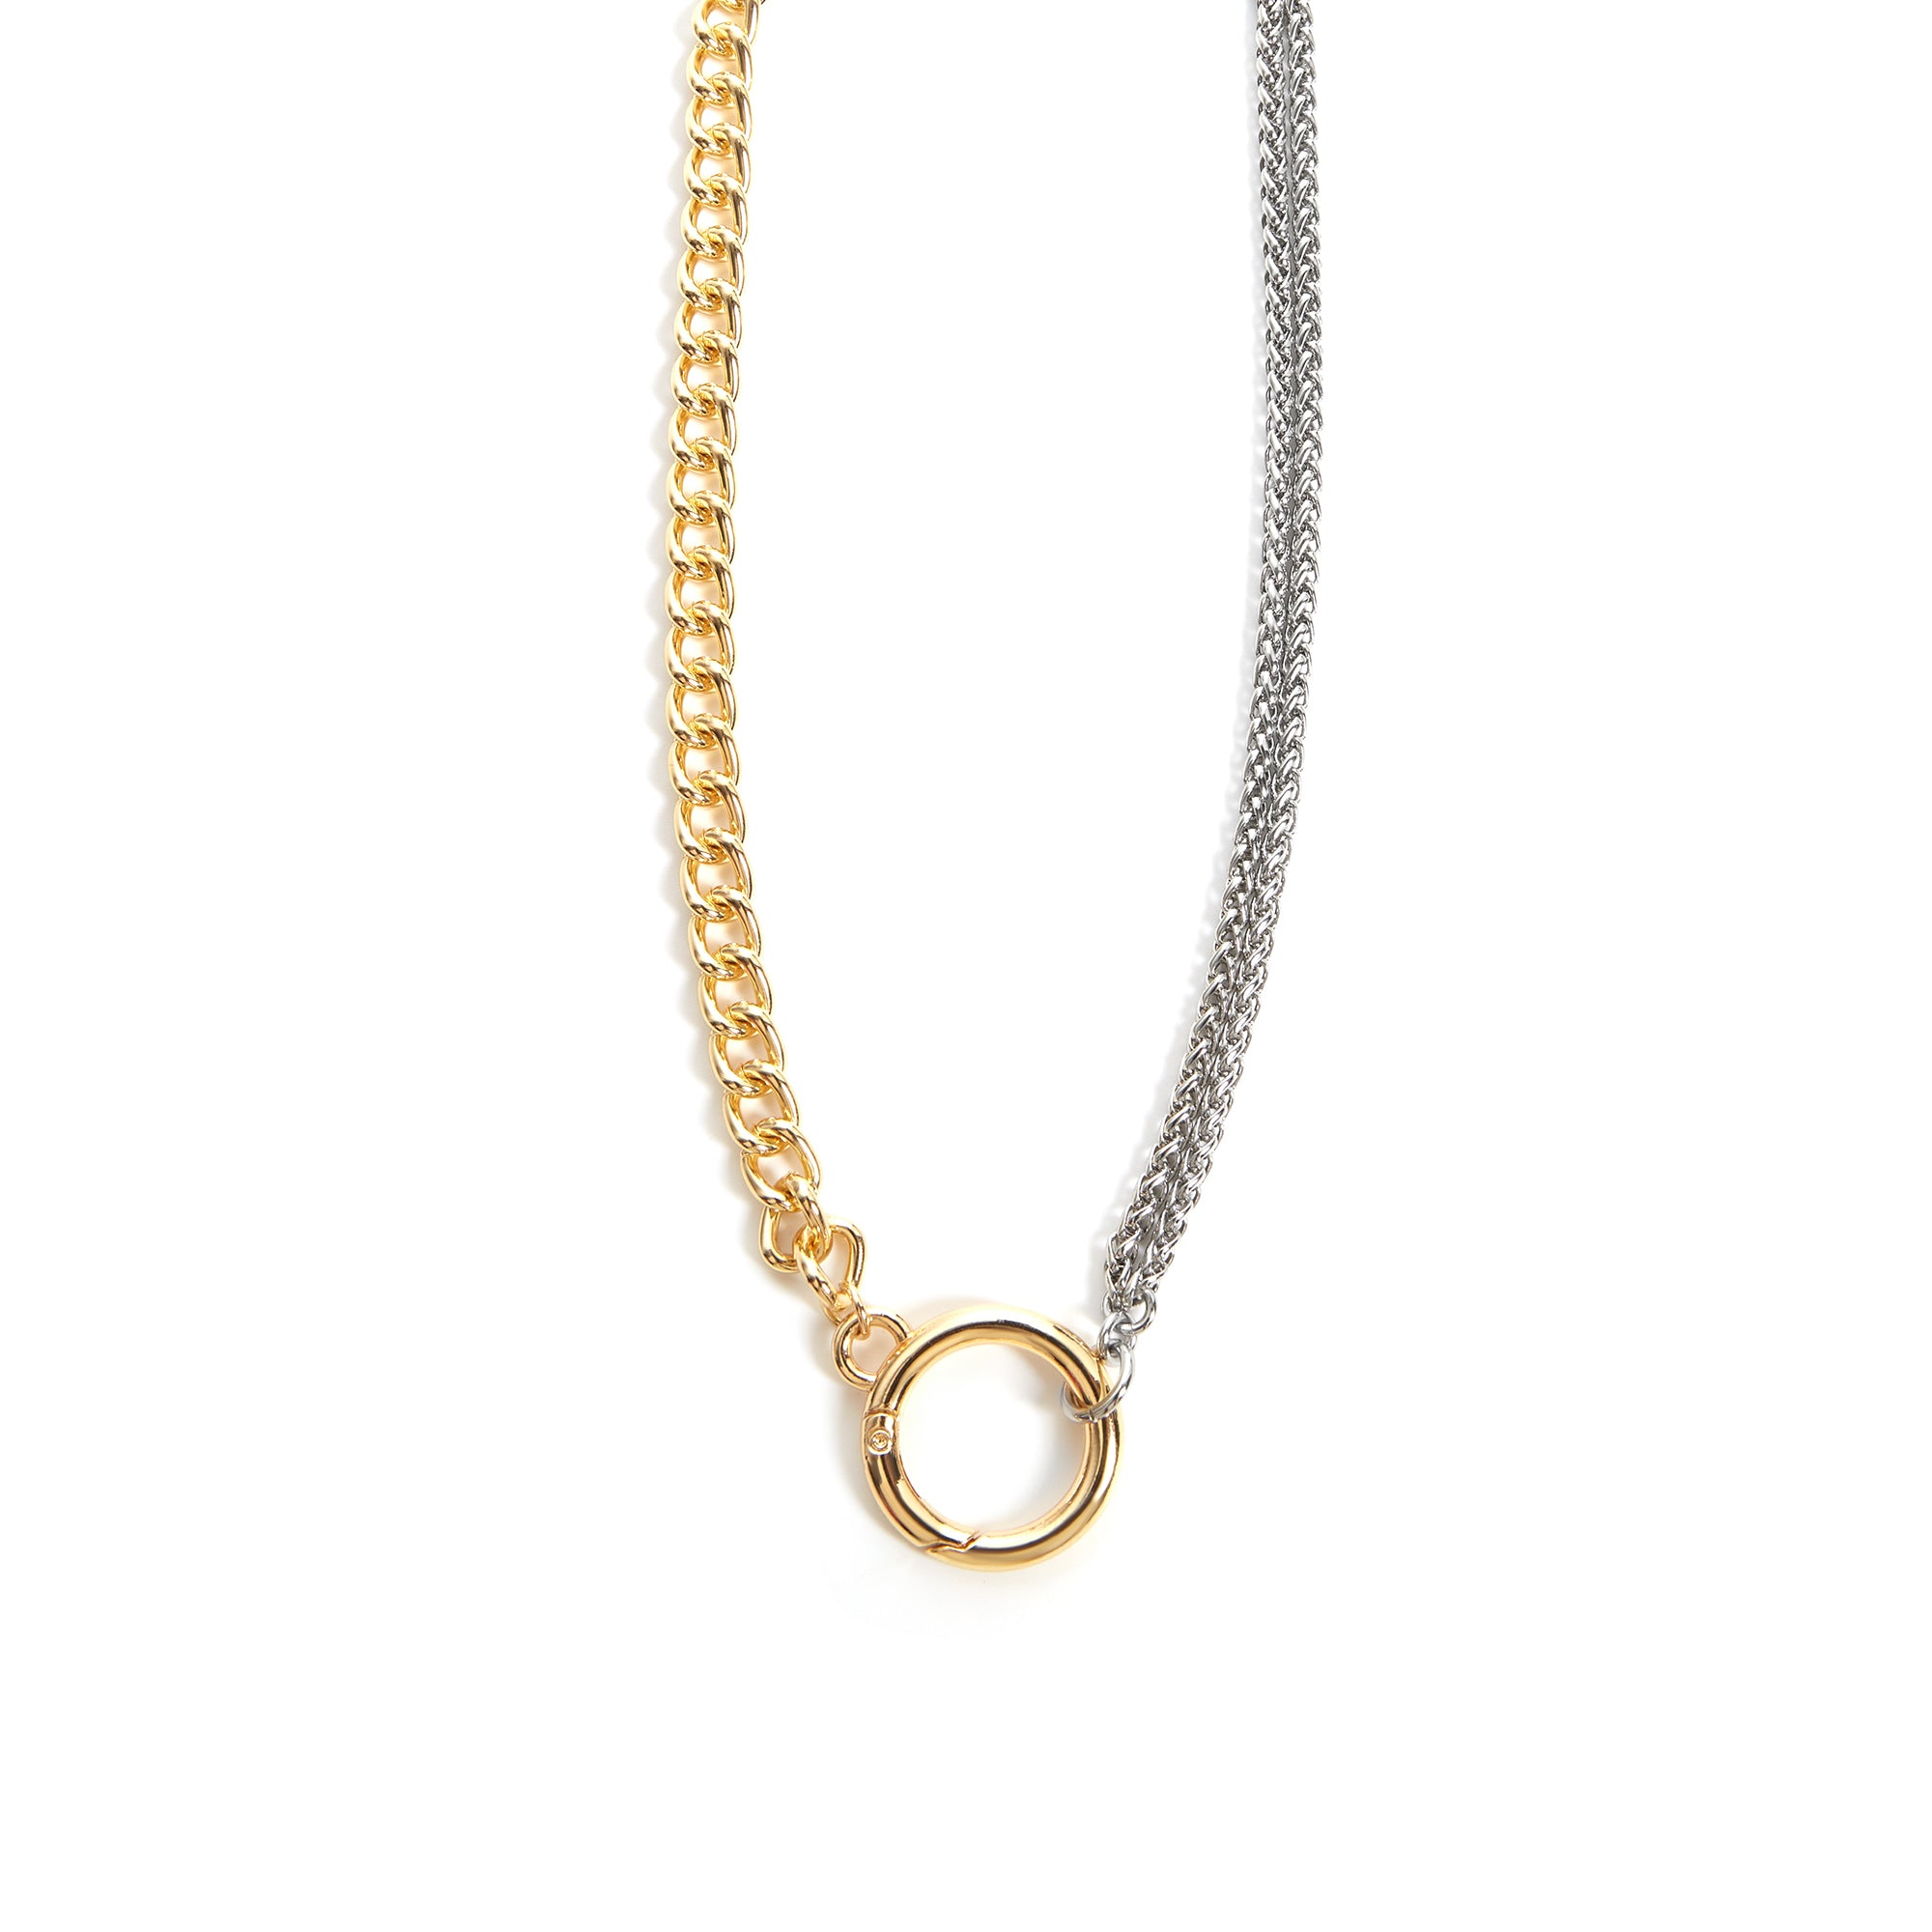 THE TWO TONE OPEN CIRCLE NECKLACE